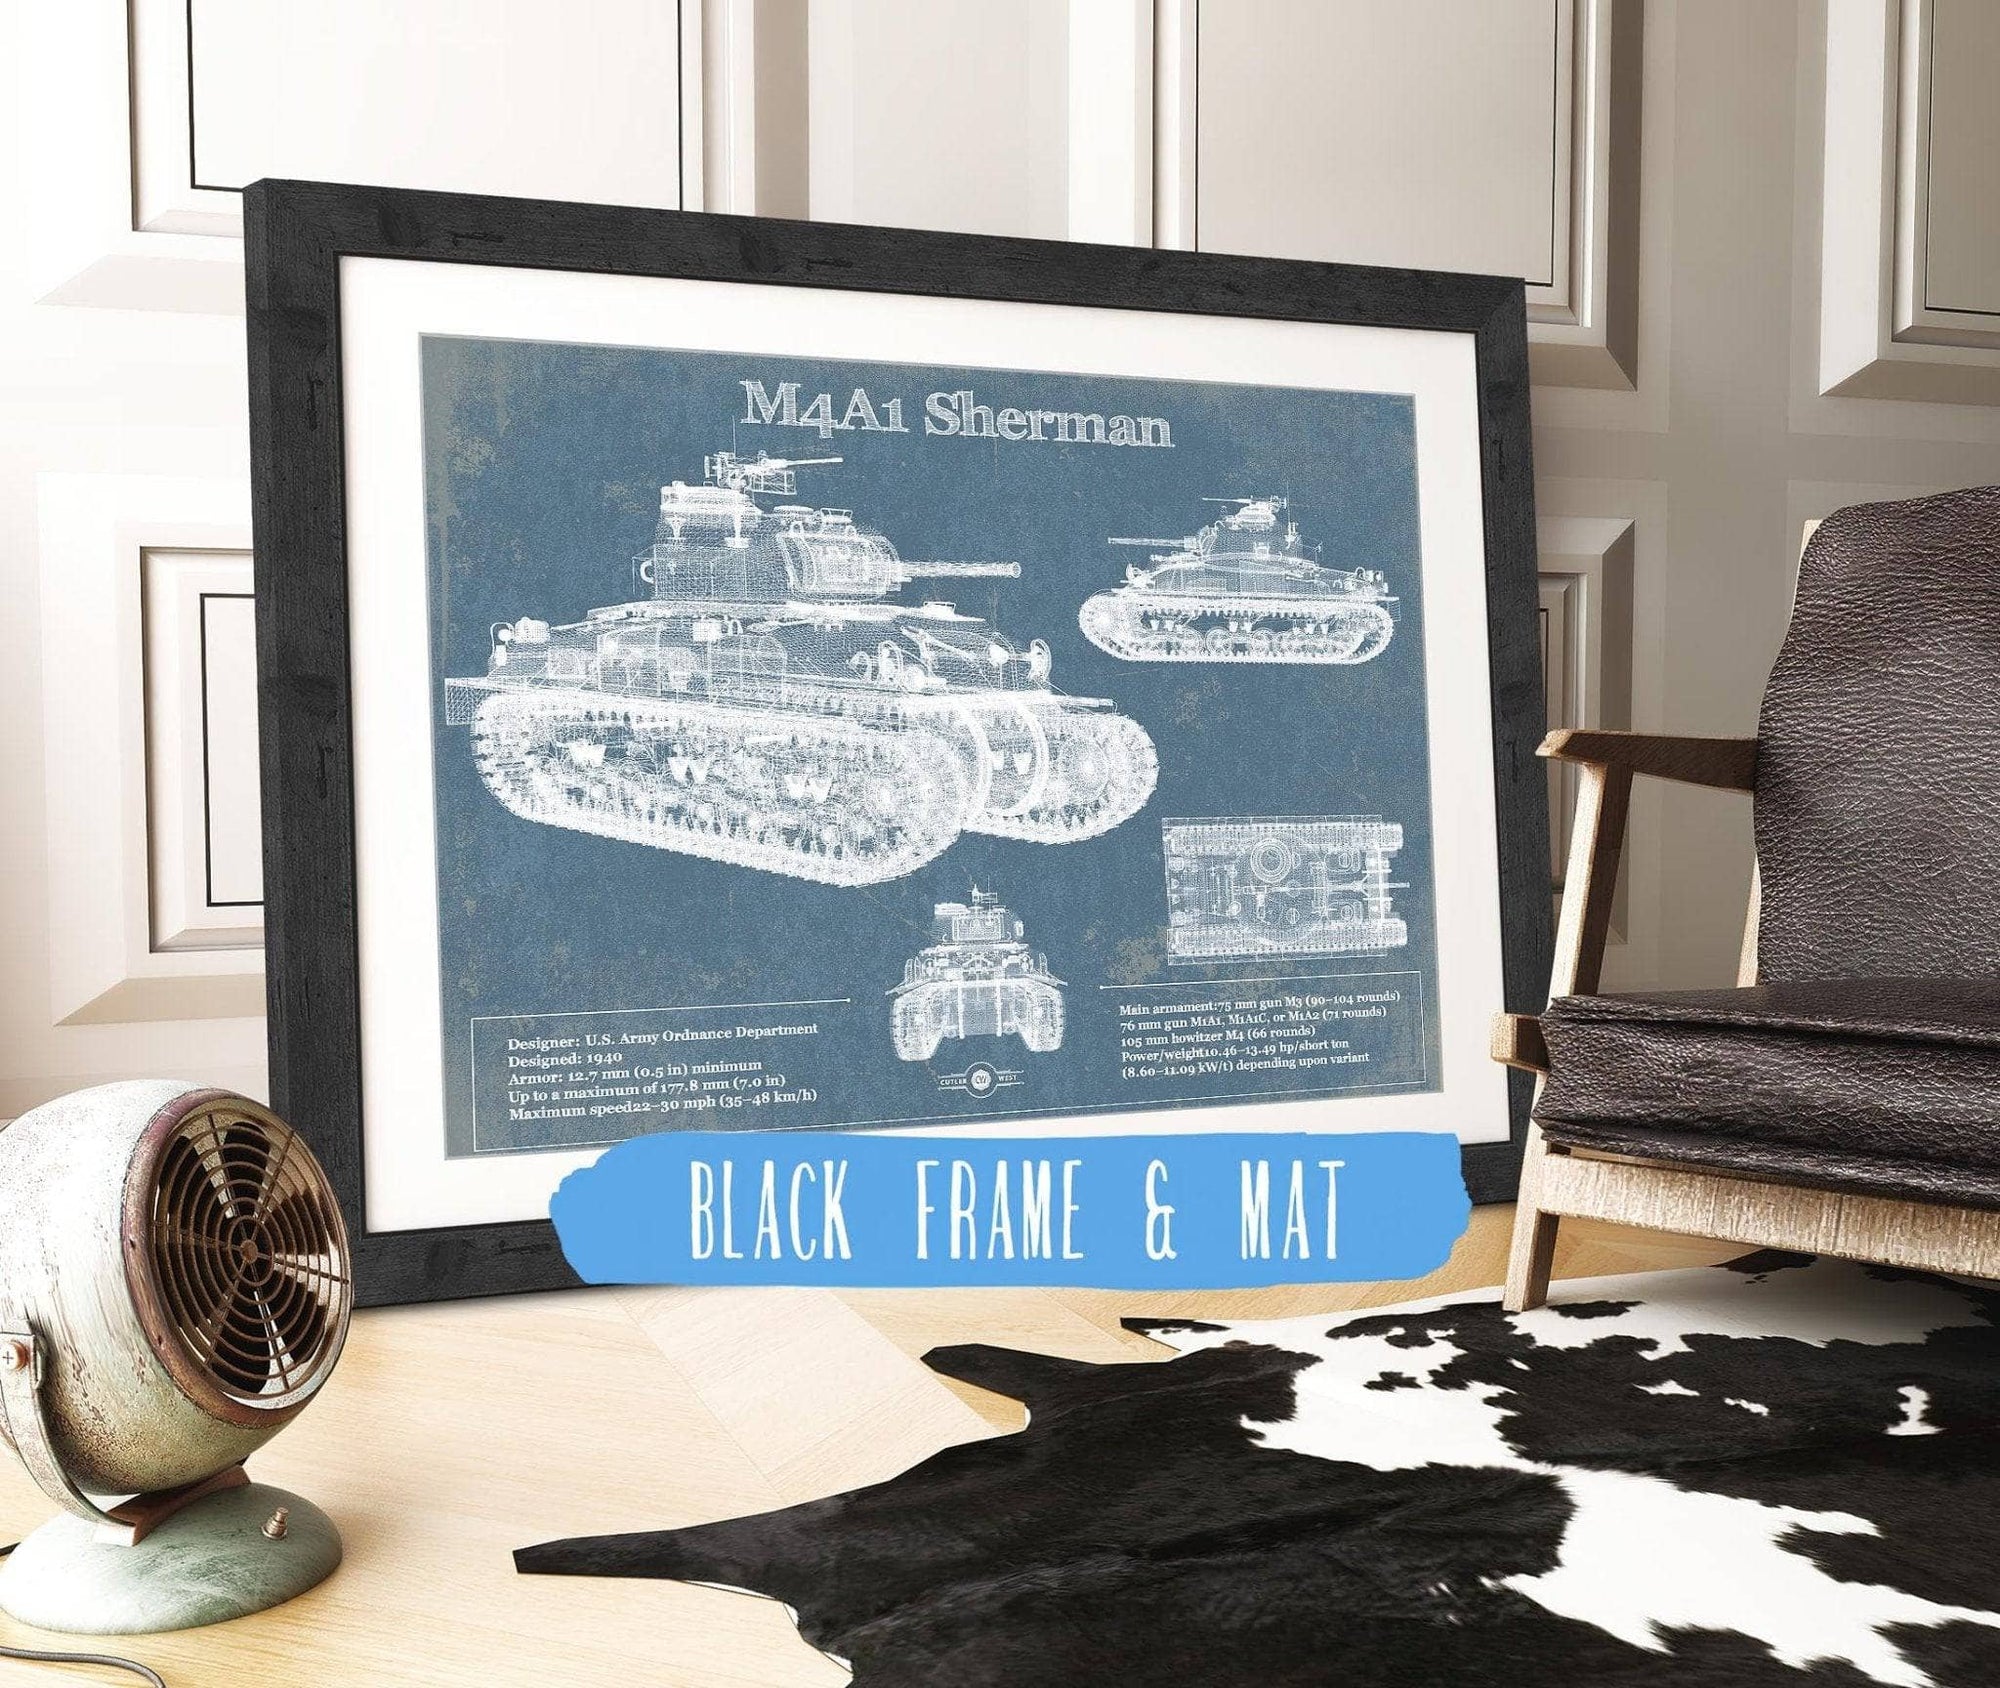 Cutler West Military Weapons Collection 14" x 11" / Black Frame & Mat M4A1 Sherman Tank Vintage Blueprint Print 845000241_15766